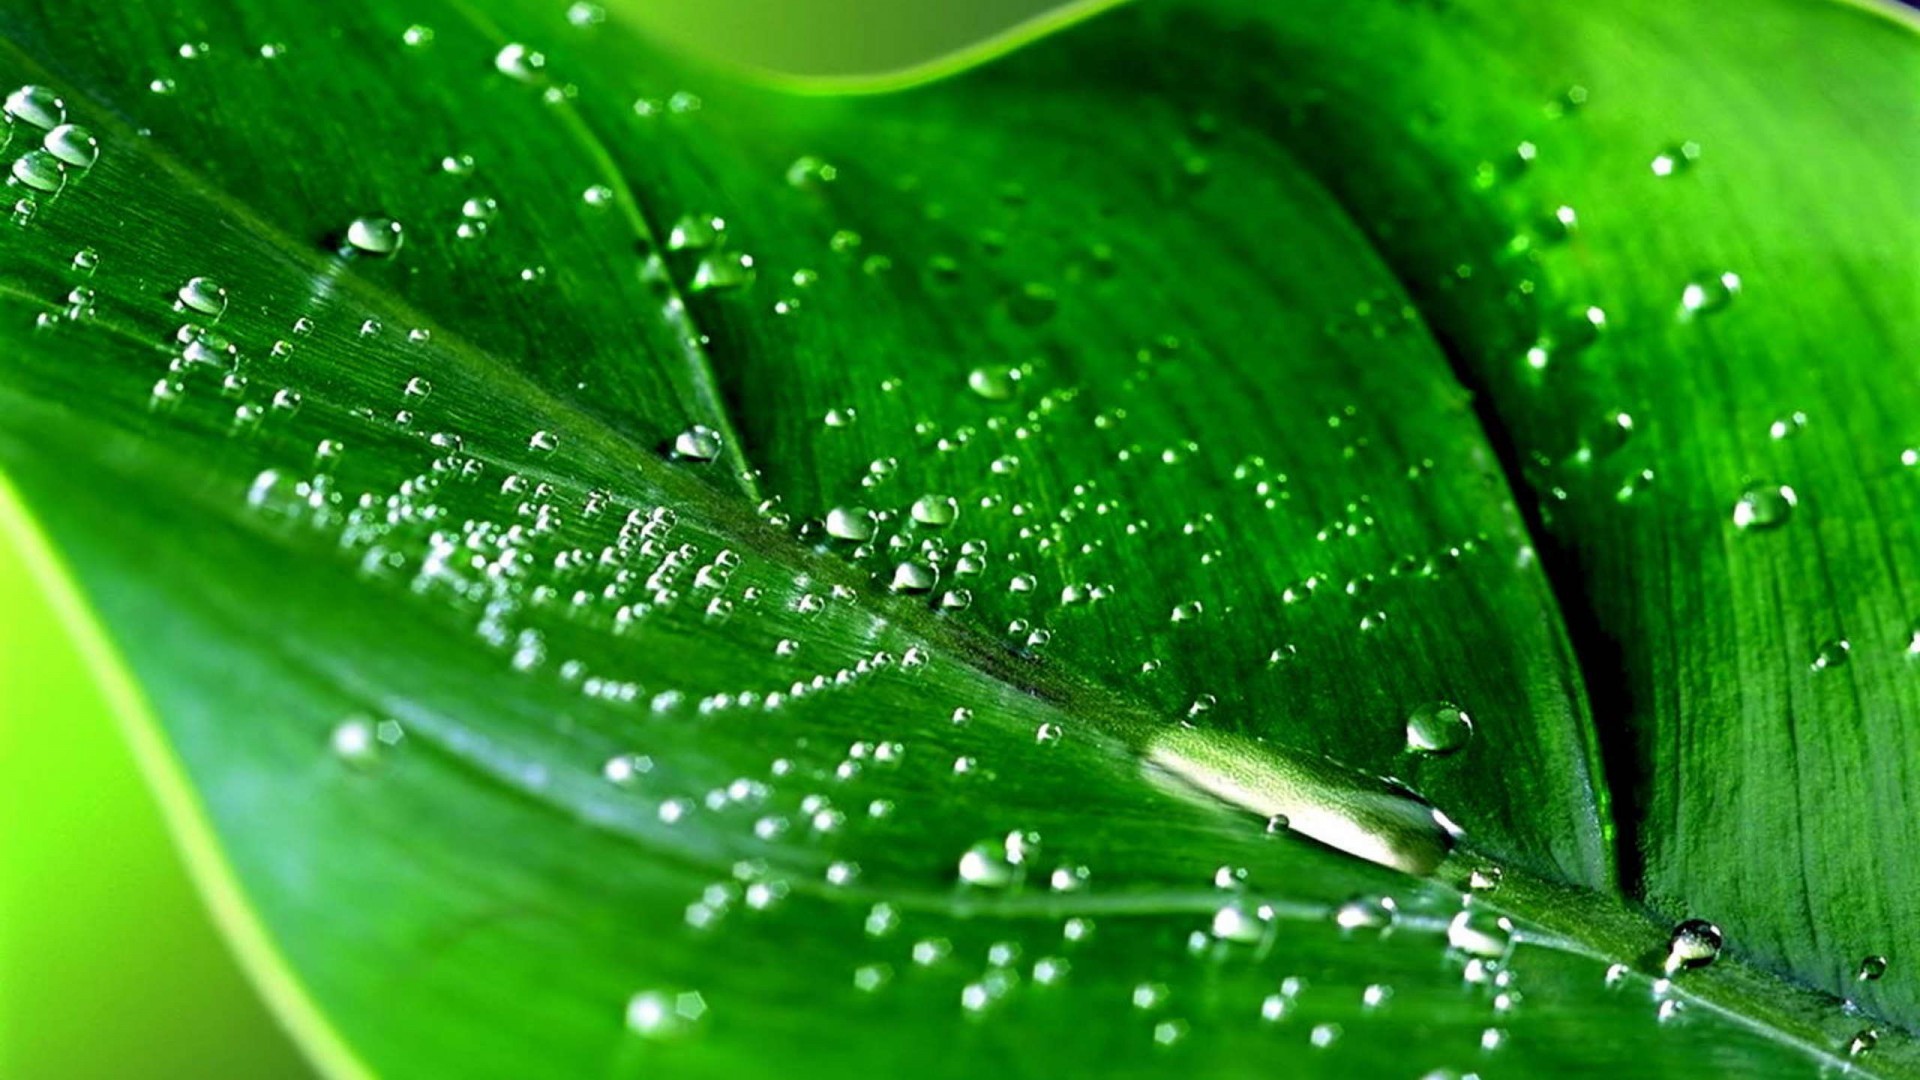 1920x1080 free hd wallpaper high resolution download high definiton wallpapers desktop  images windows 10 backgrounds amazing quality images computer wallpapers  cool ...